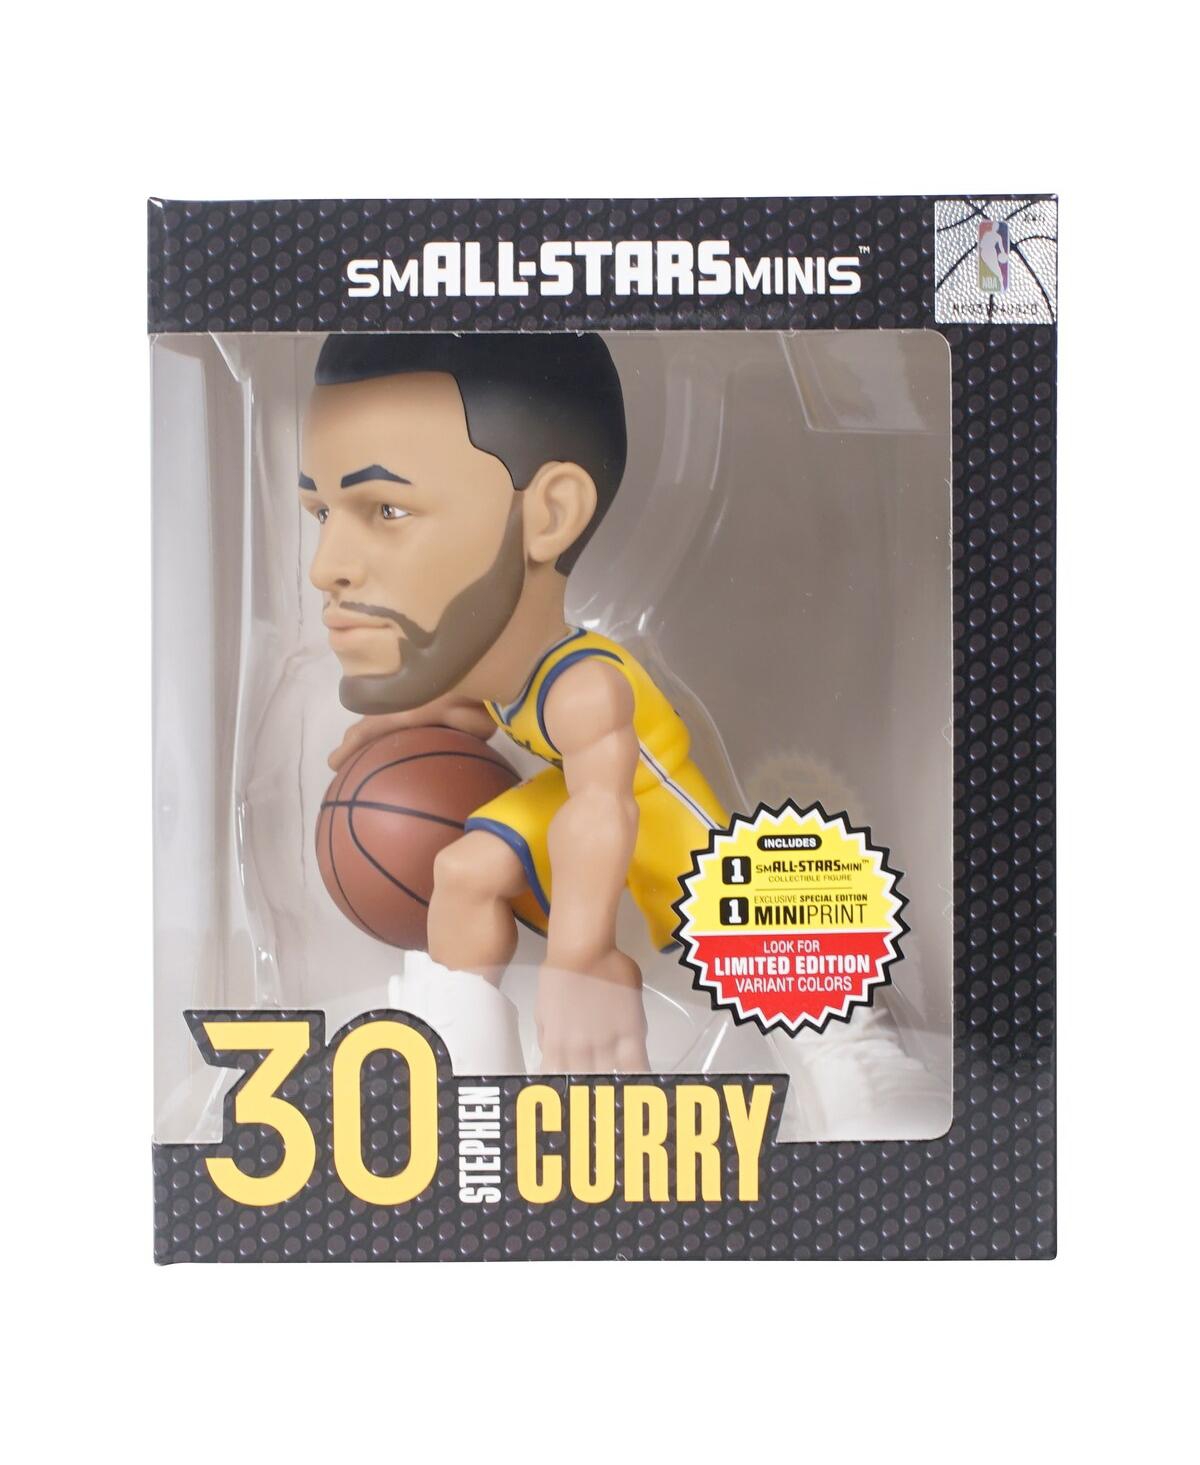 Small-stars Stephen Curry Golden State Warriors  Minis Gold 6" Vinyl Figurine In Yellow